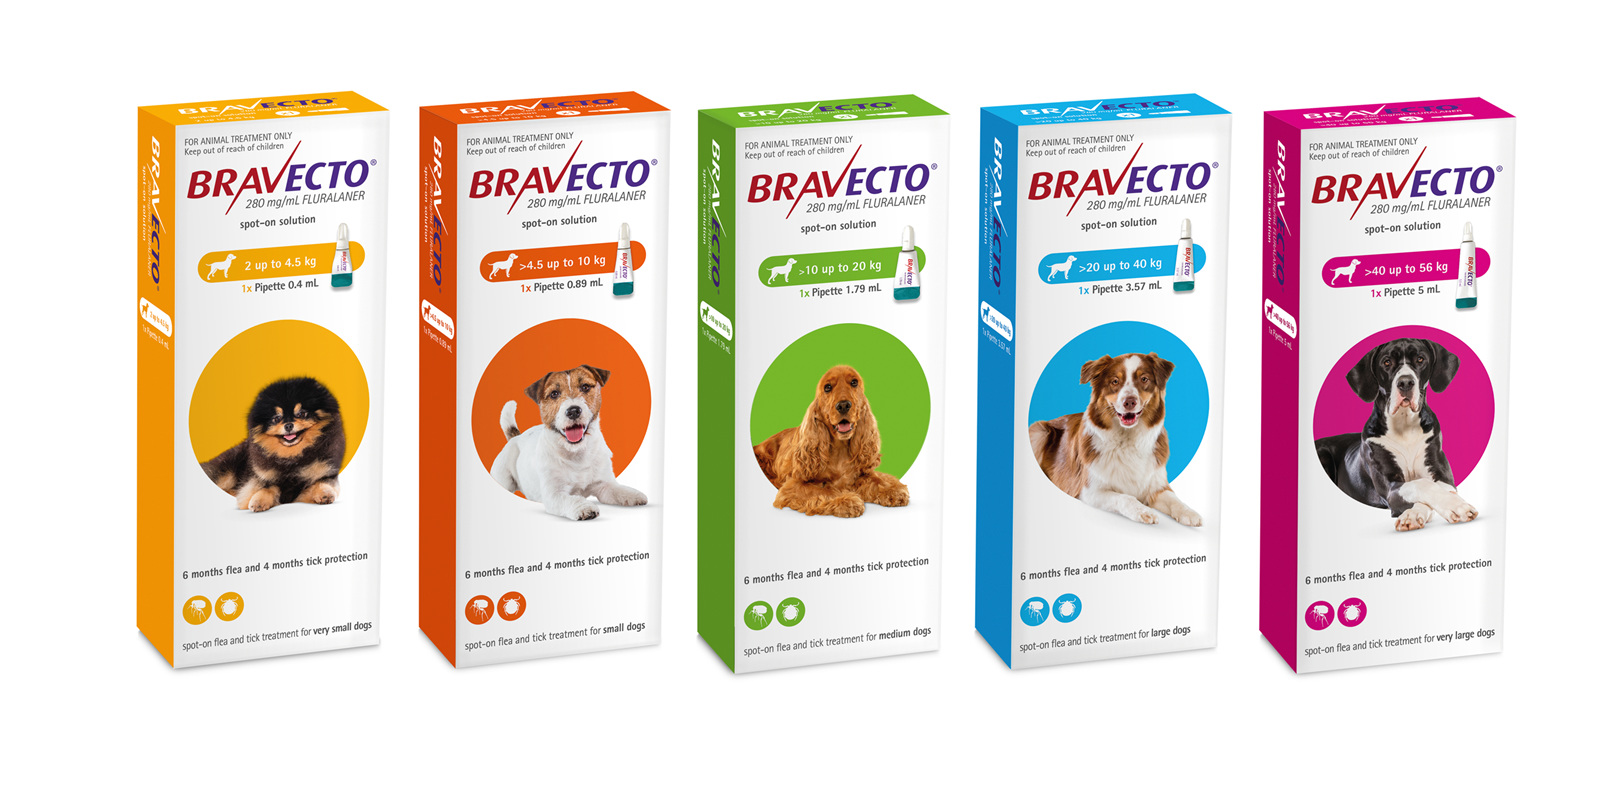 bravecto-spot-on-for-dogs-normanby-road-vet-clinic